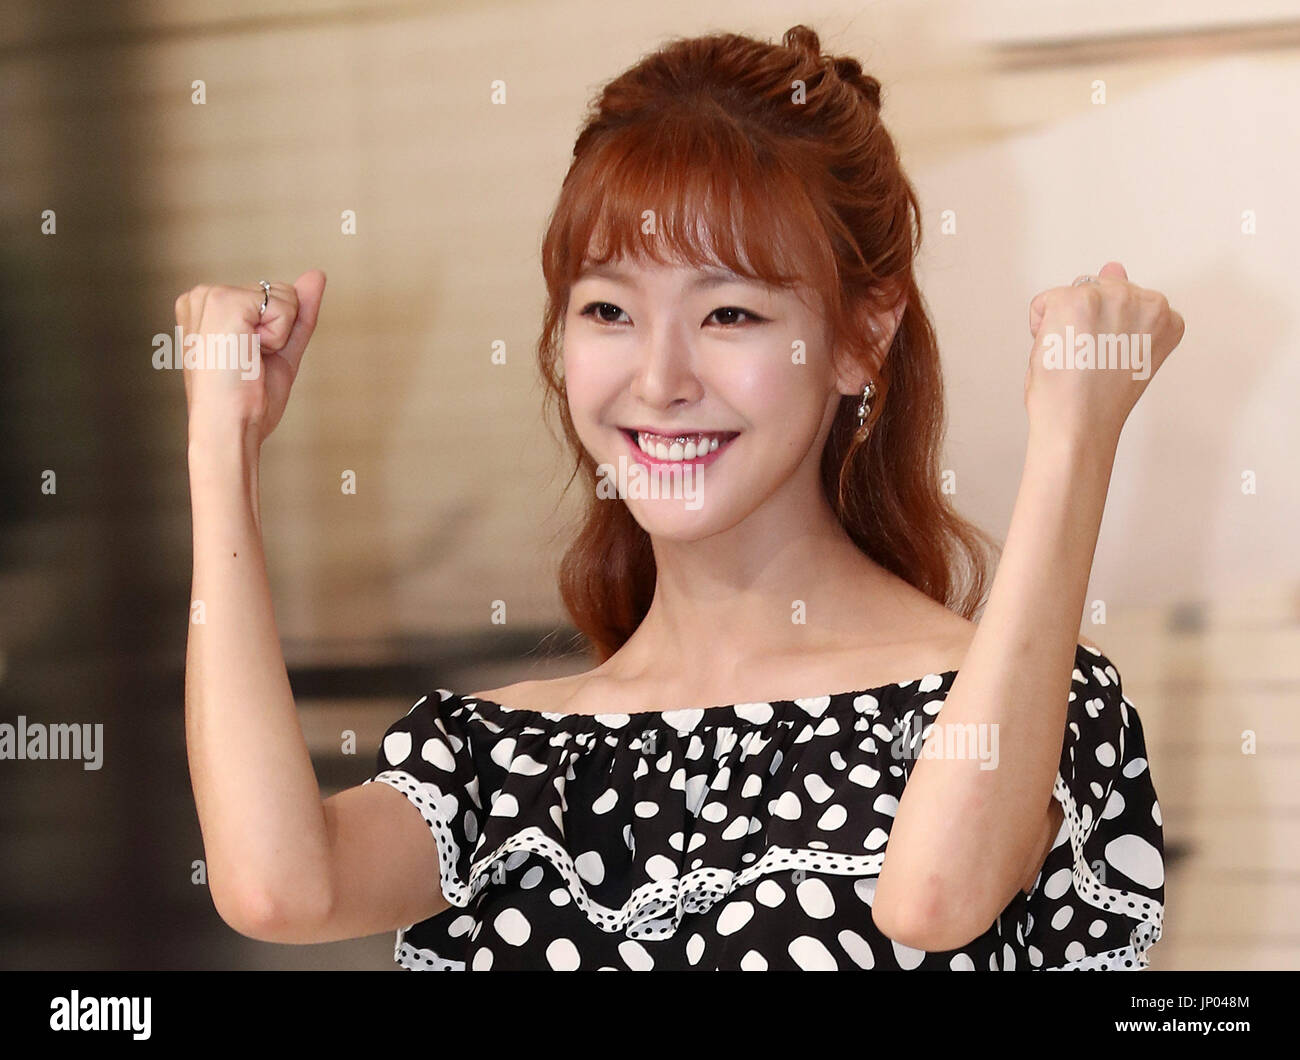 New Tv Drama Strongest Deliveryman Go Won Hee Who Stars In The New Stock Photo Alamy